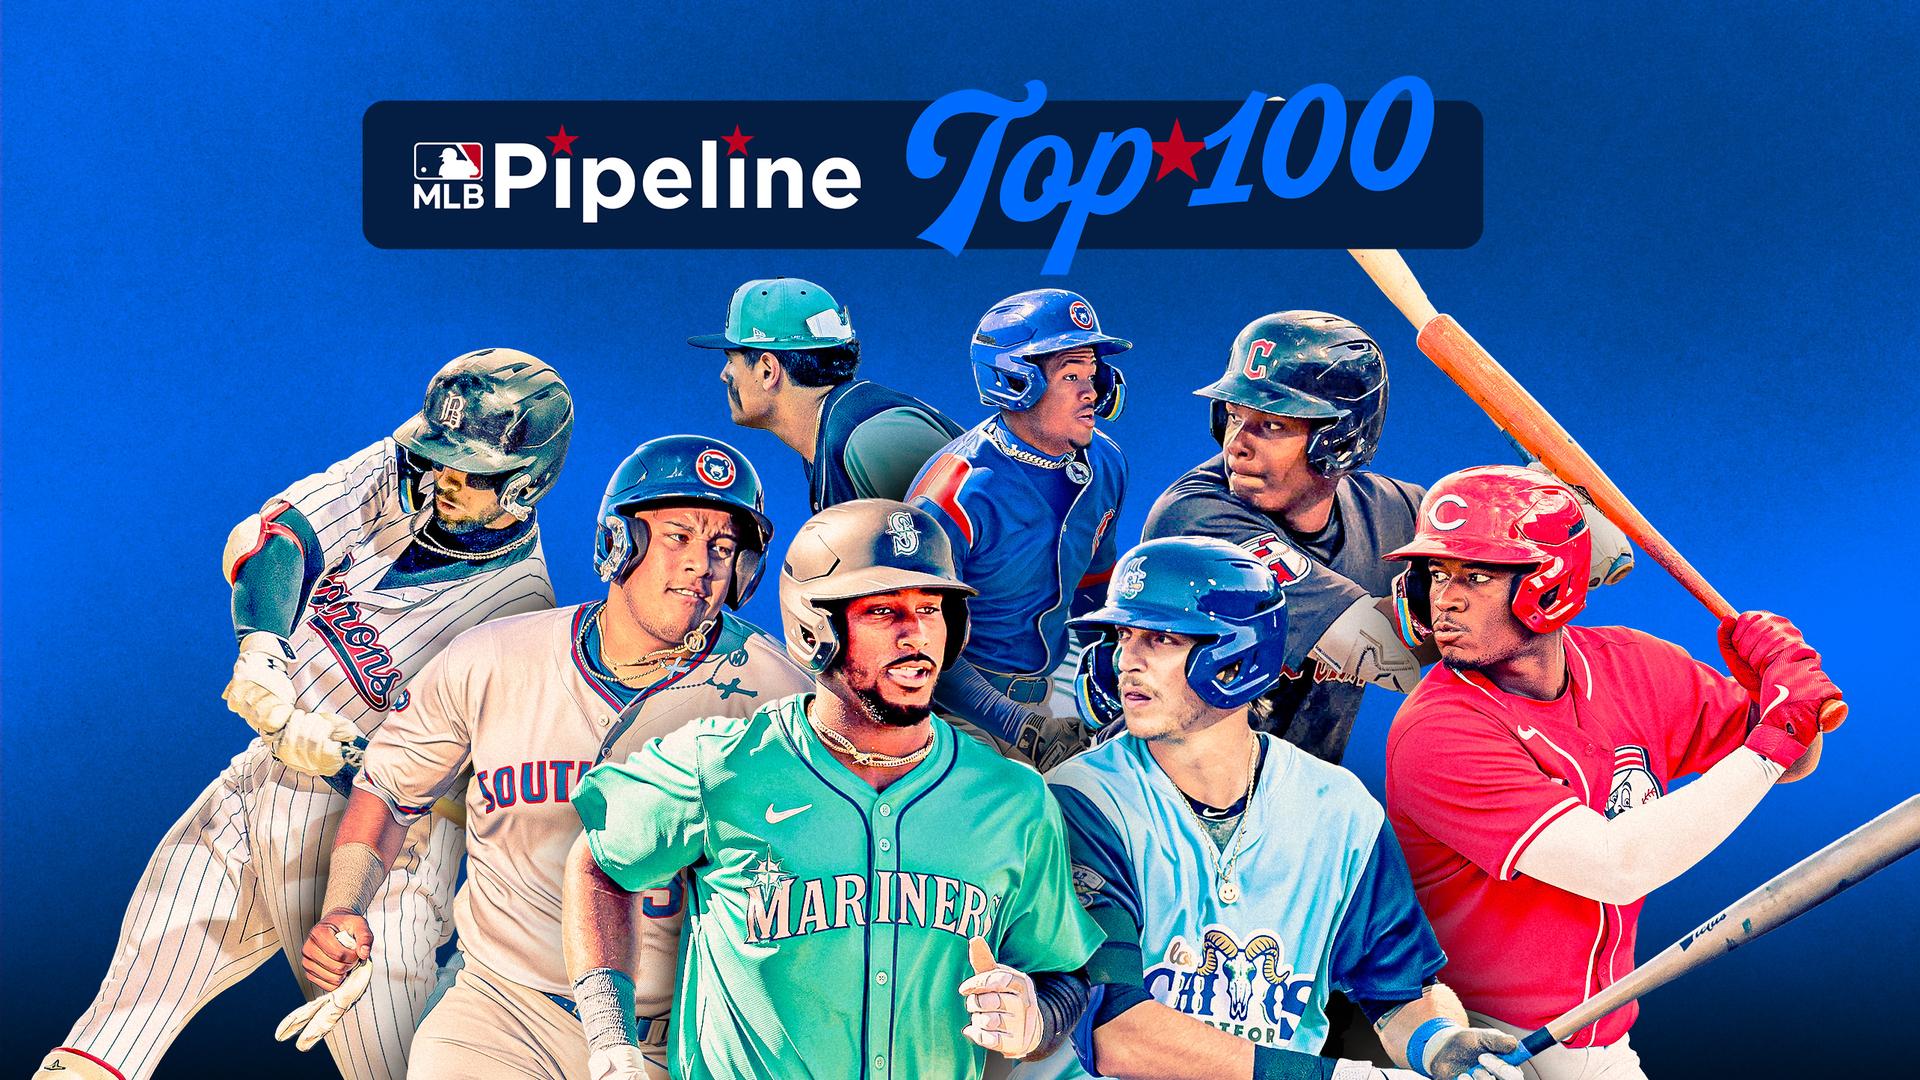 New prospects on the Top 100